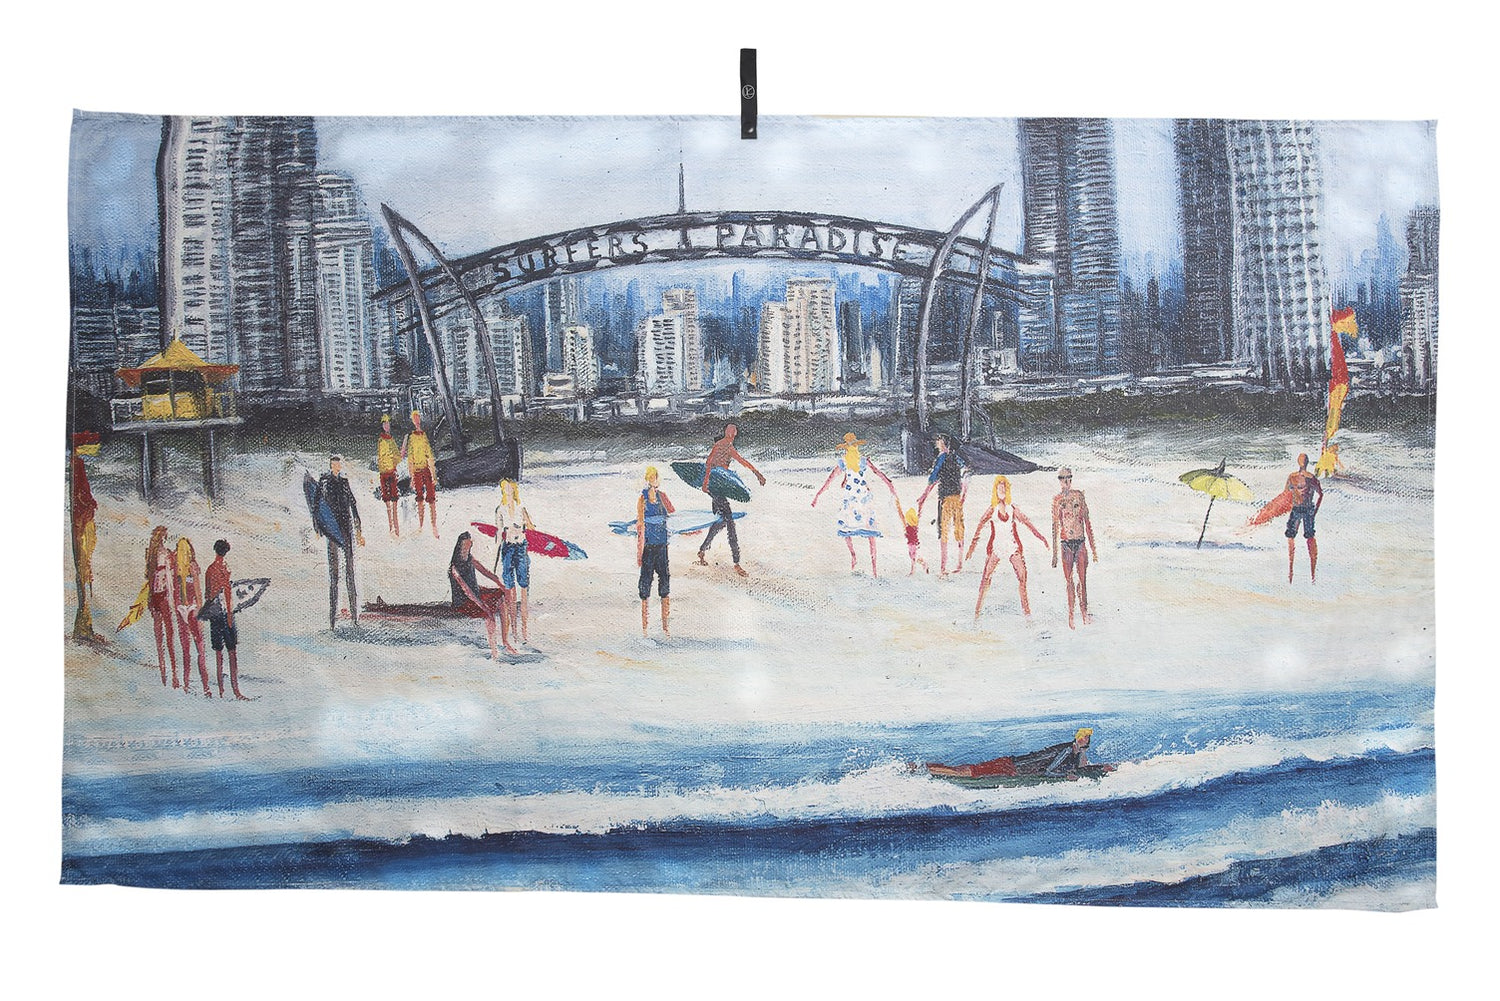 Surfers Paradise microfibre artistic towel. The towel shows an art inspiration of the Gold Coast’s suburb of Surfers Paradise. It includes at the beach the famous Surfers Paradise sign, the sea, lifeguards, yellow and red beach safety flag, lifeguard’s tower, surfers, families and kids, beach umbrellas and tall buildings at the back. Large size, 170cm x 95cm, soft touch, compact and sand free beach towel. An Aussie-inspired art showcasing magnificent landmarks and the Aussie lifestyle.